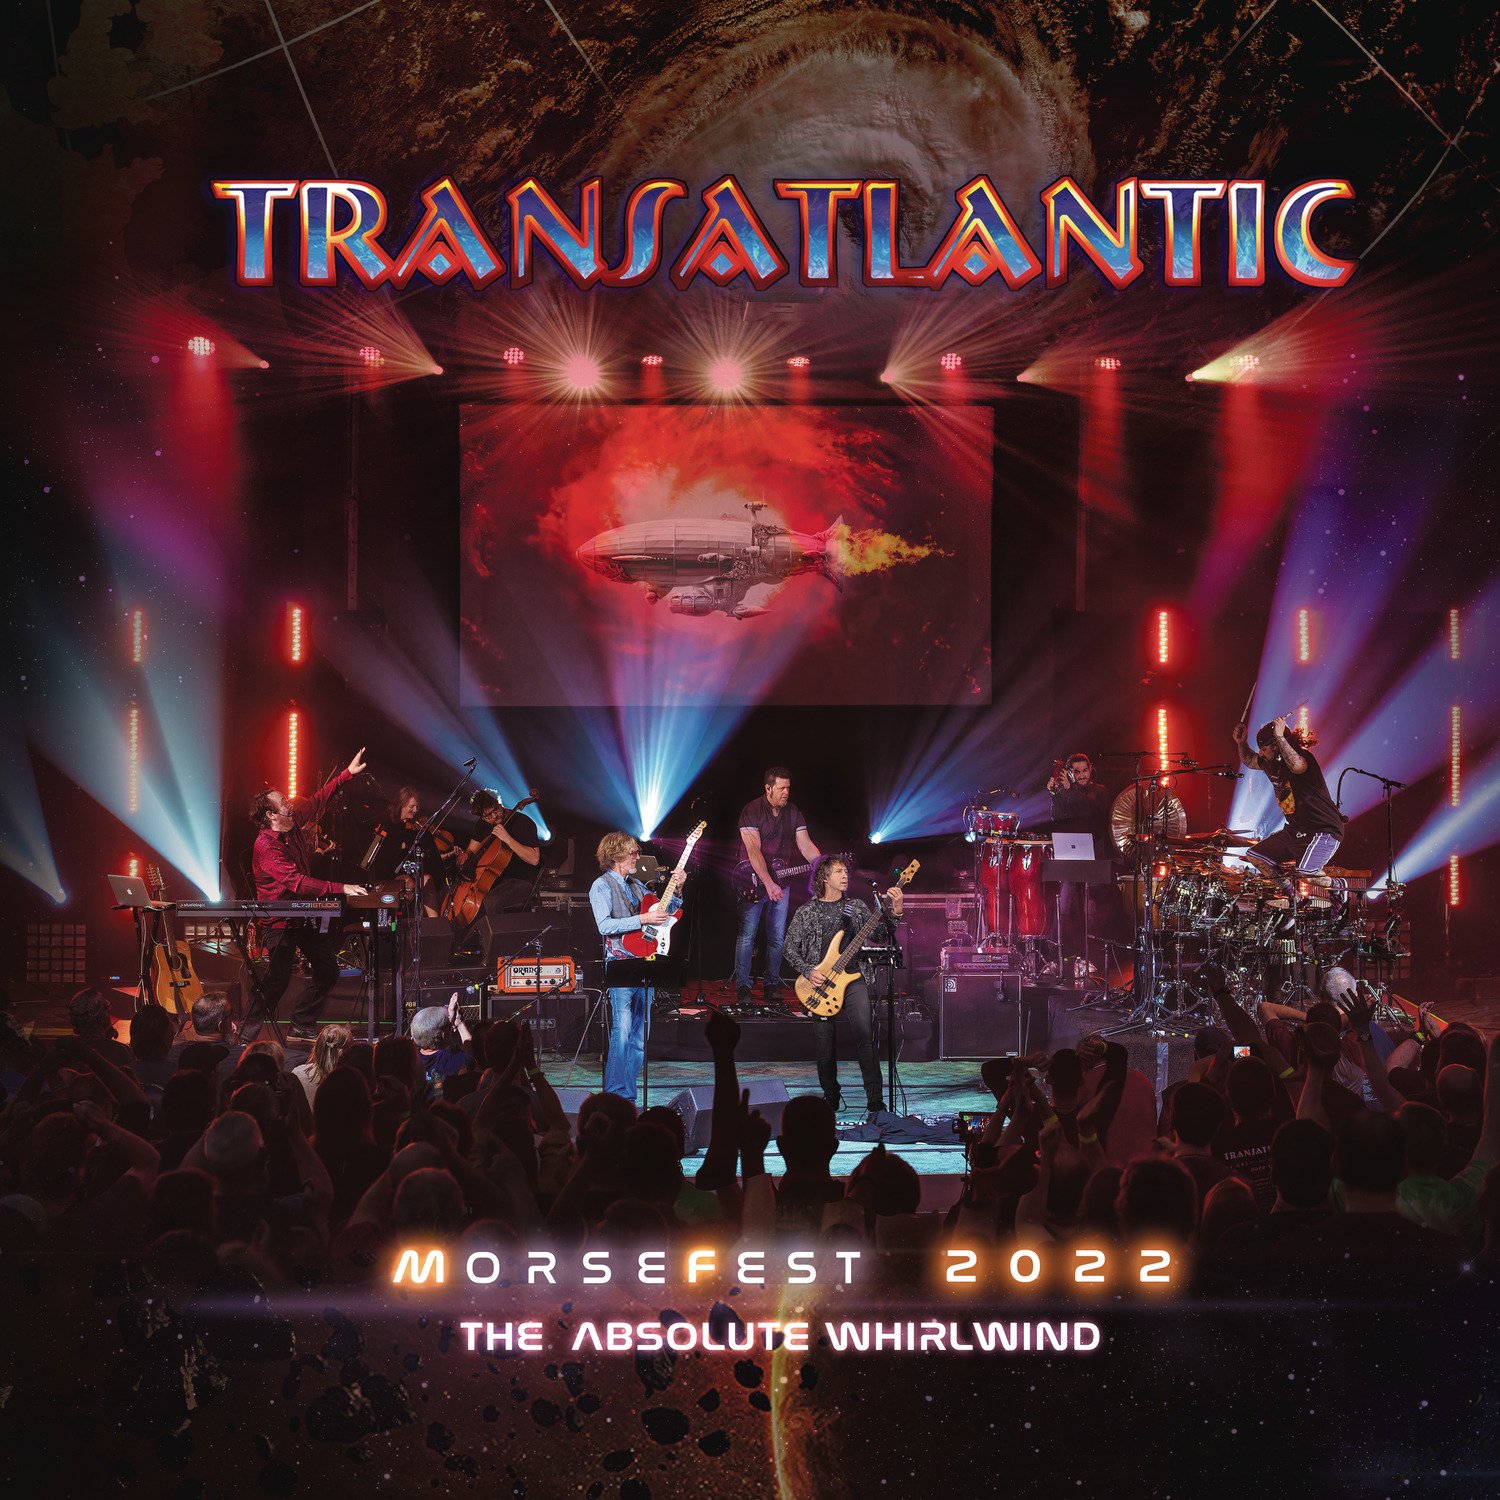 CD Shop - TRANSATLANTIC LIVE AT MORSEFEST 2022: THE ABSOLUTE WHIRLWIND / 5XCD+2XBLU-RAY